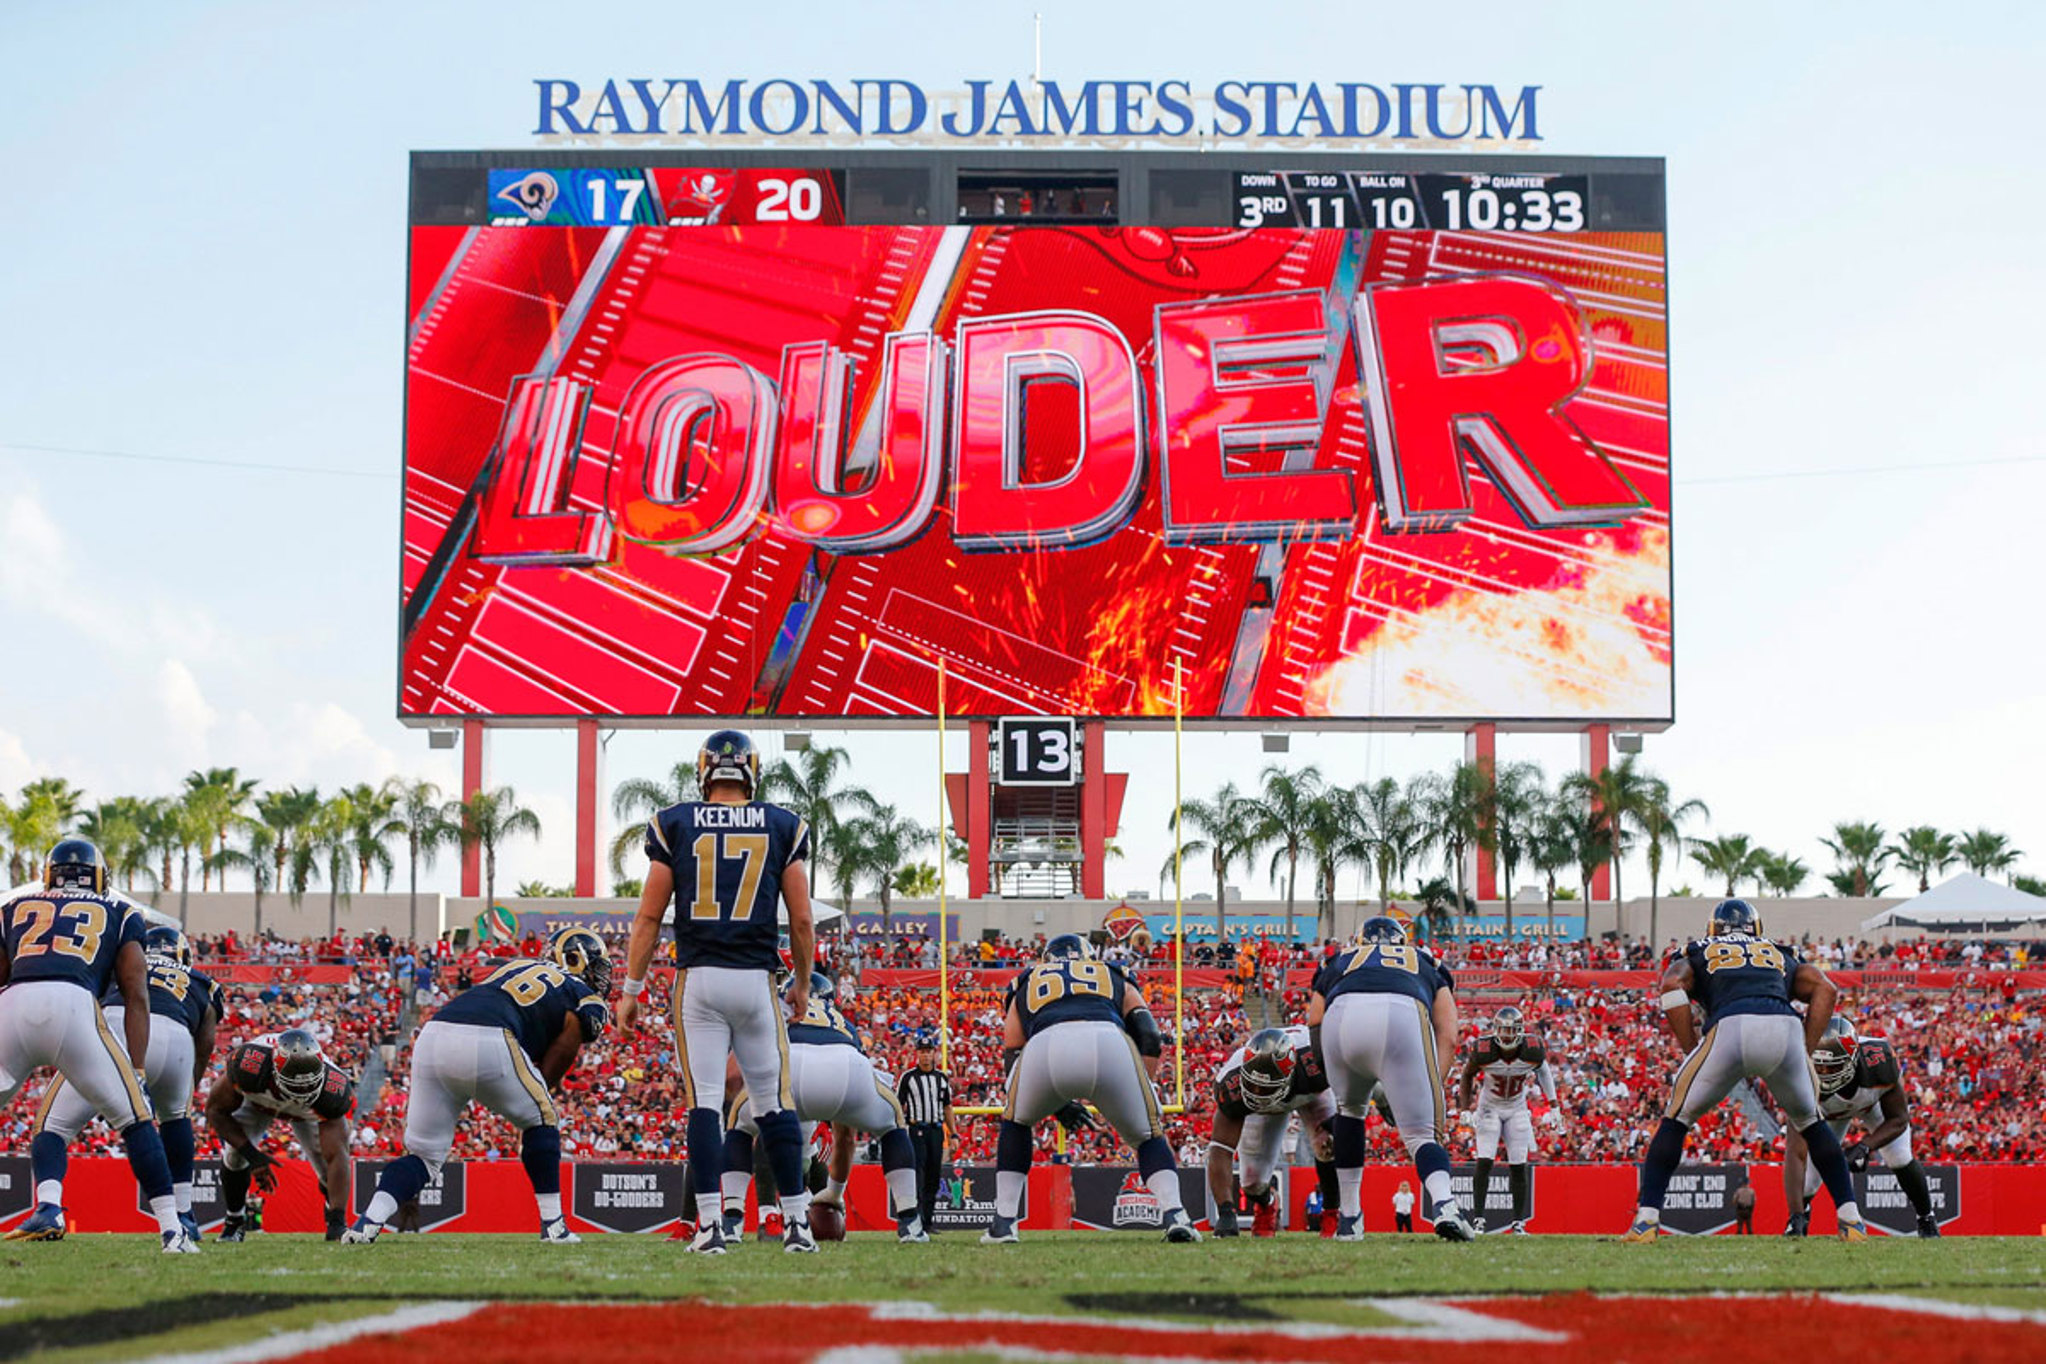 Jacksonville Jaguars team up with Daktronics to install giant HD